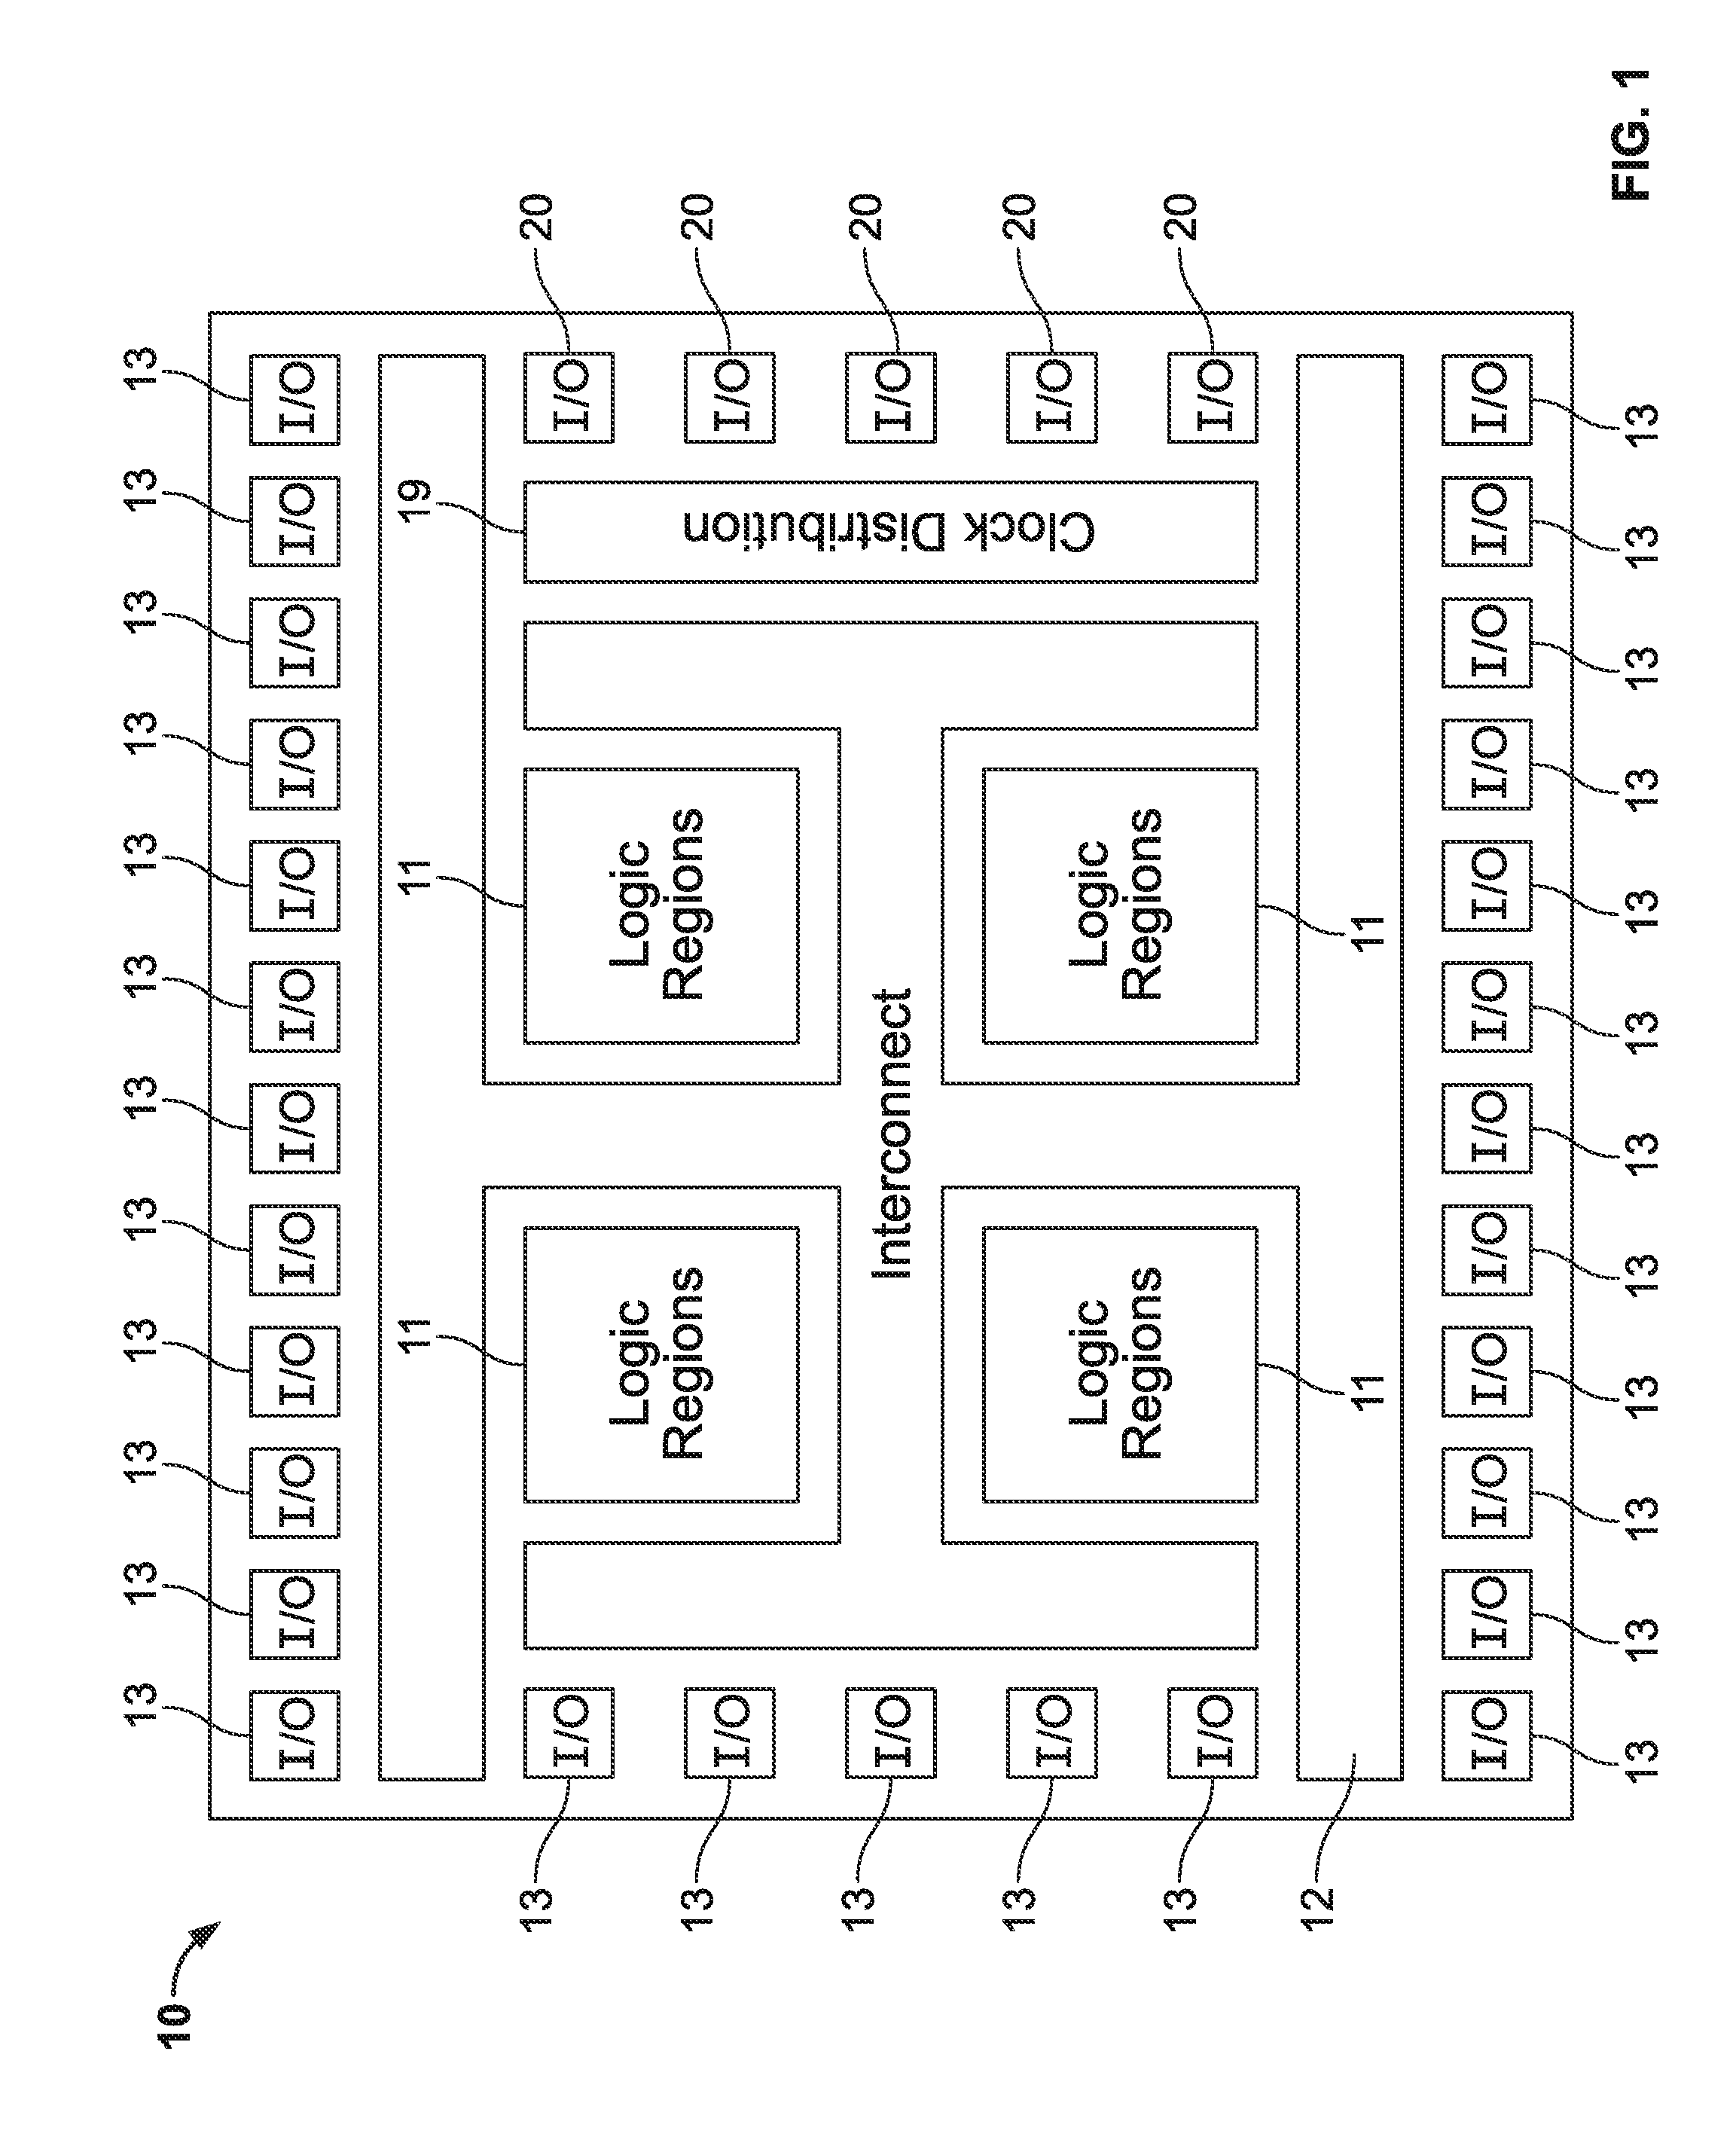 Flexible high speed forward error correction (FEC) physical medium attachment (PMA) and physical coding sublayer (PCS) connection system